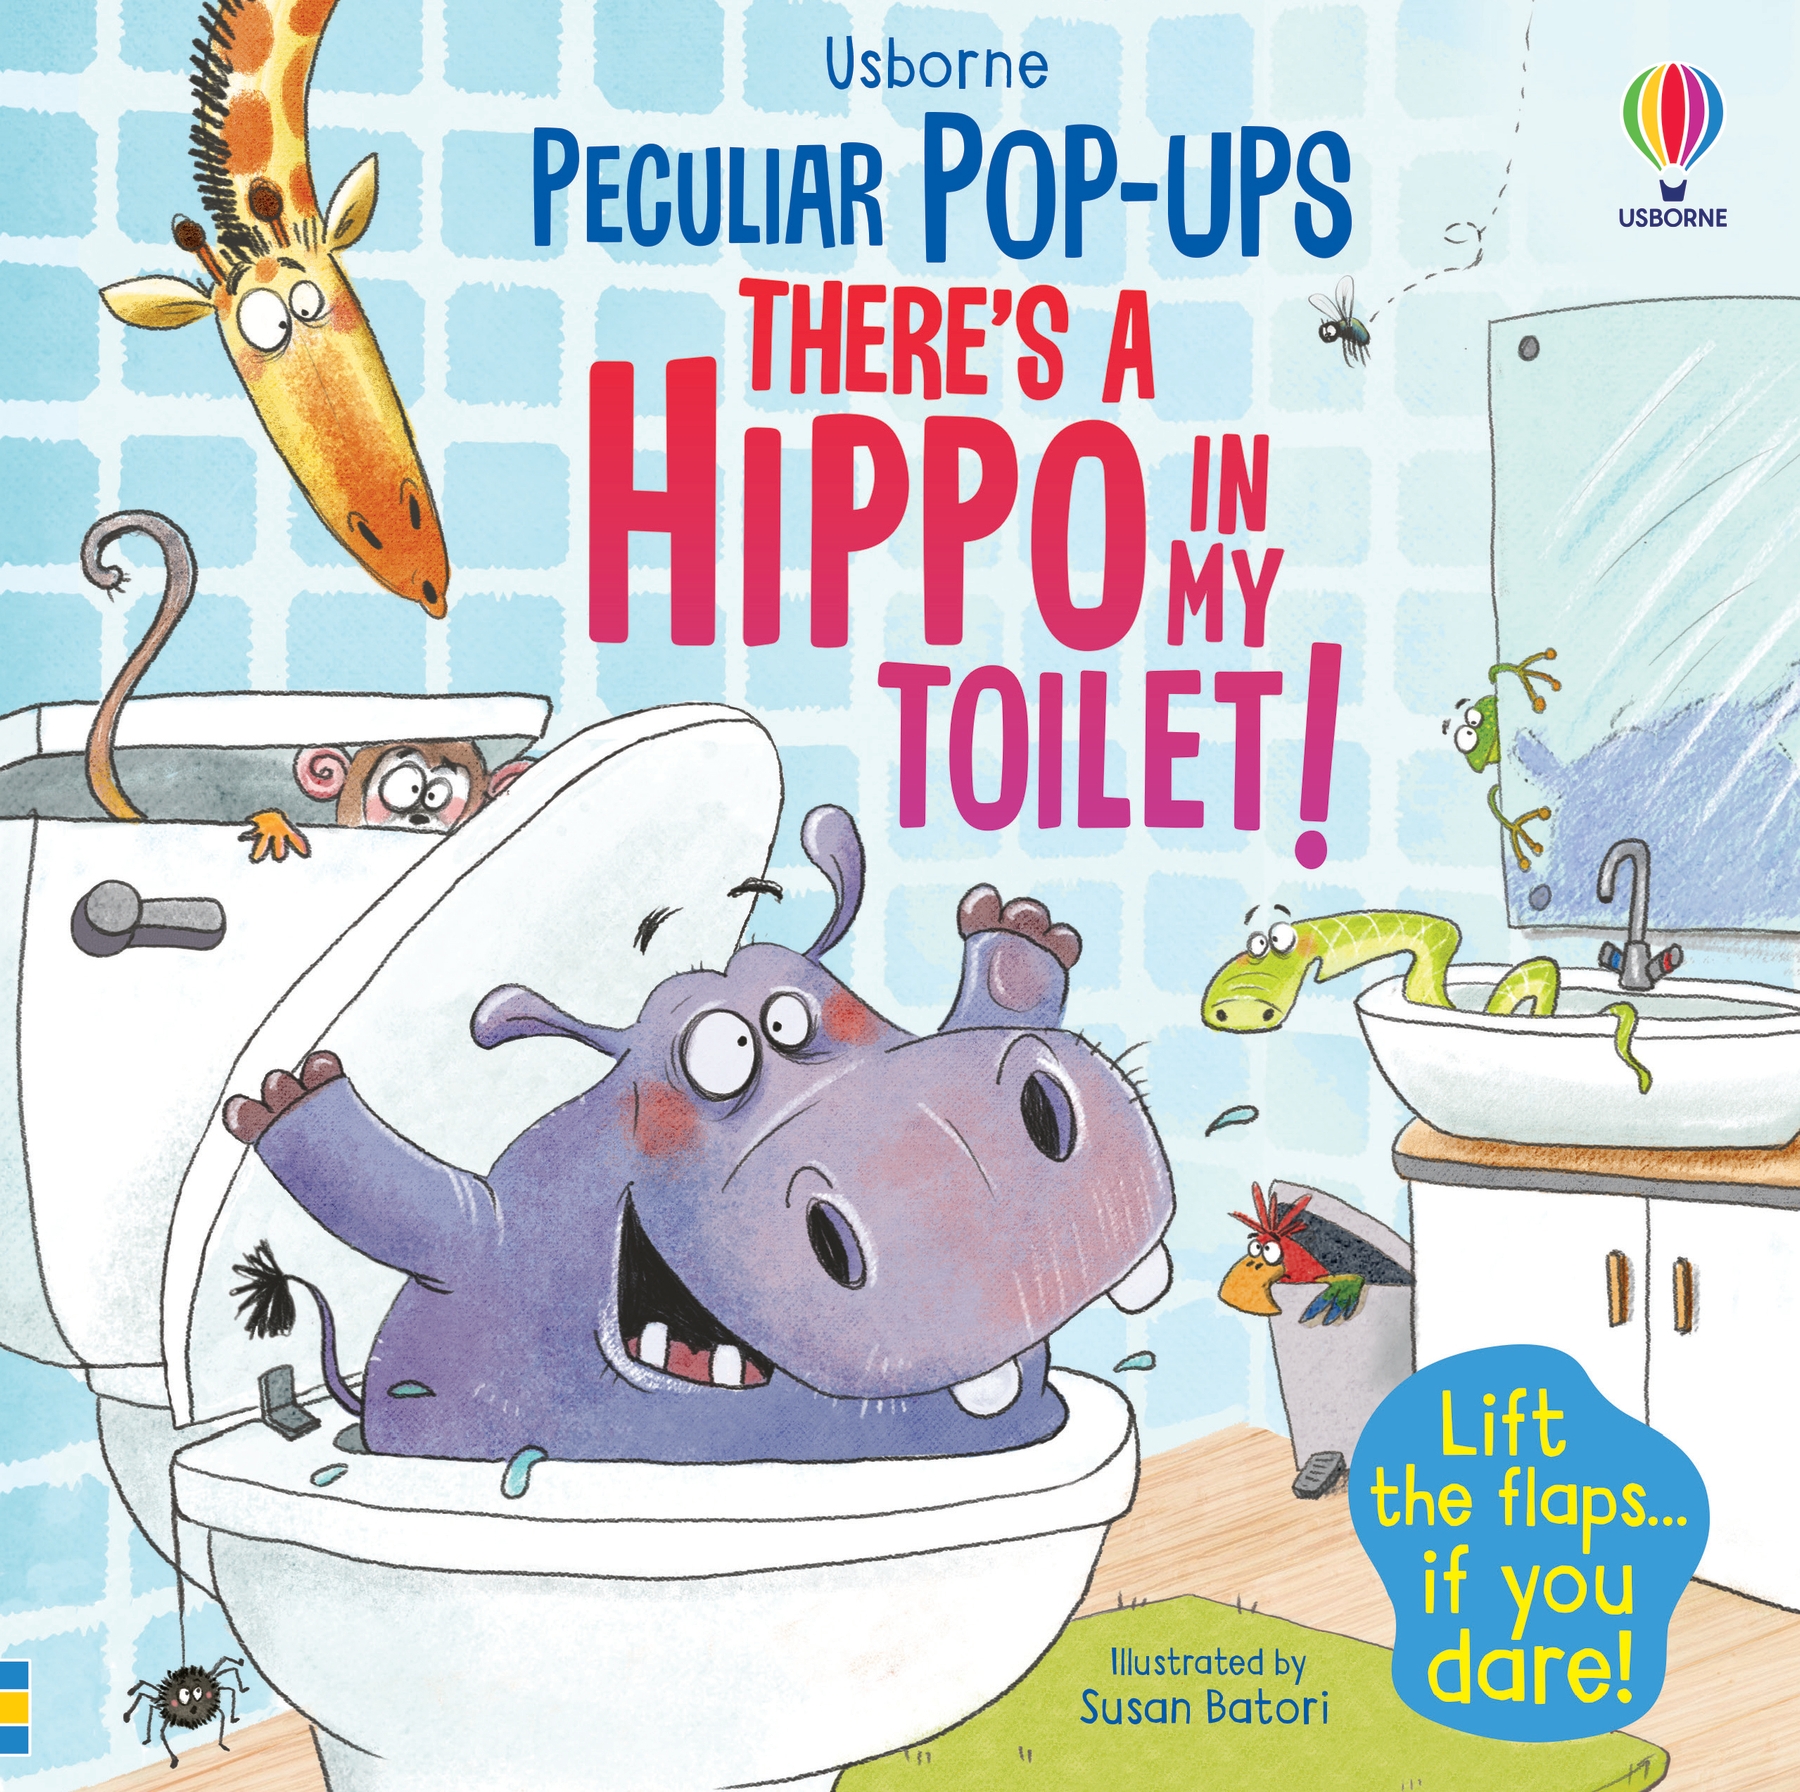 Theres a Hippo in my Toilet